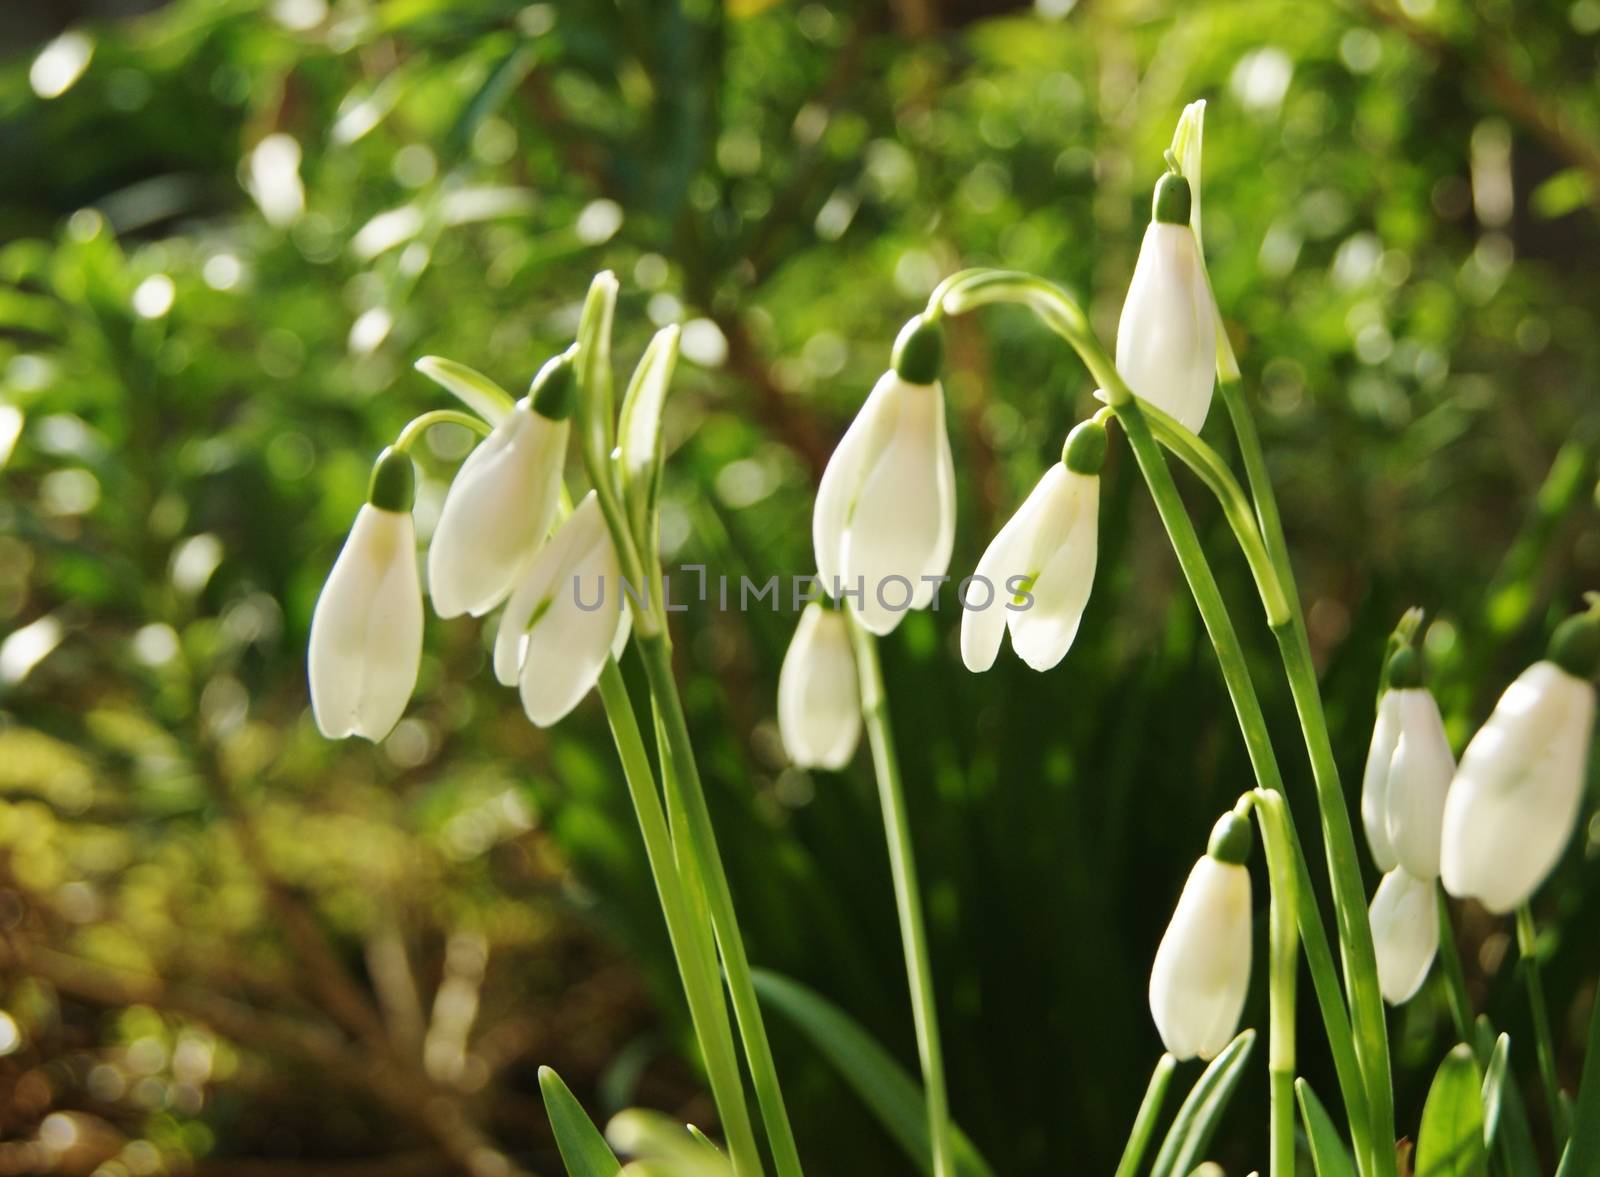 A close-up image of white Snowdrop flowers,